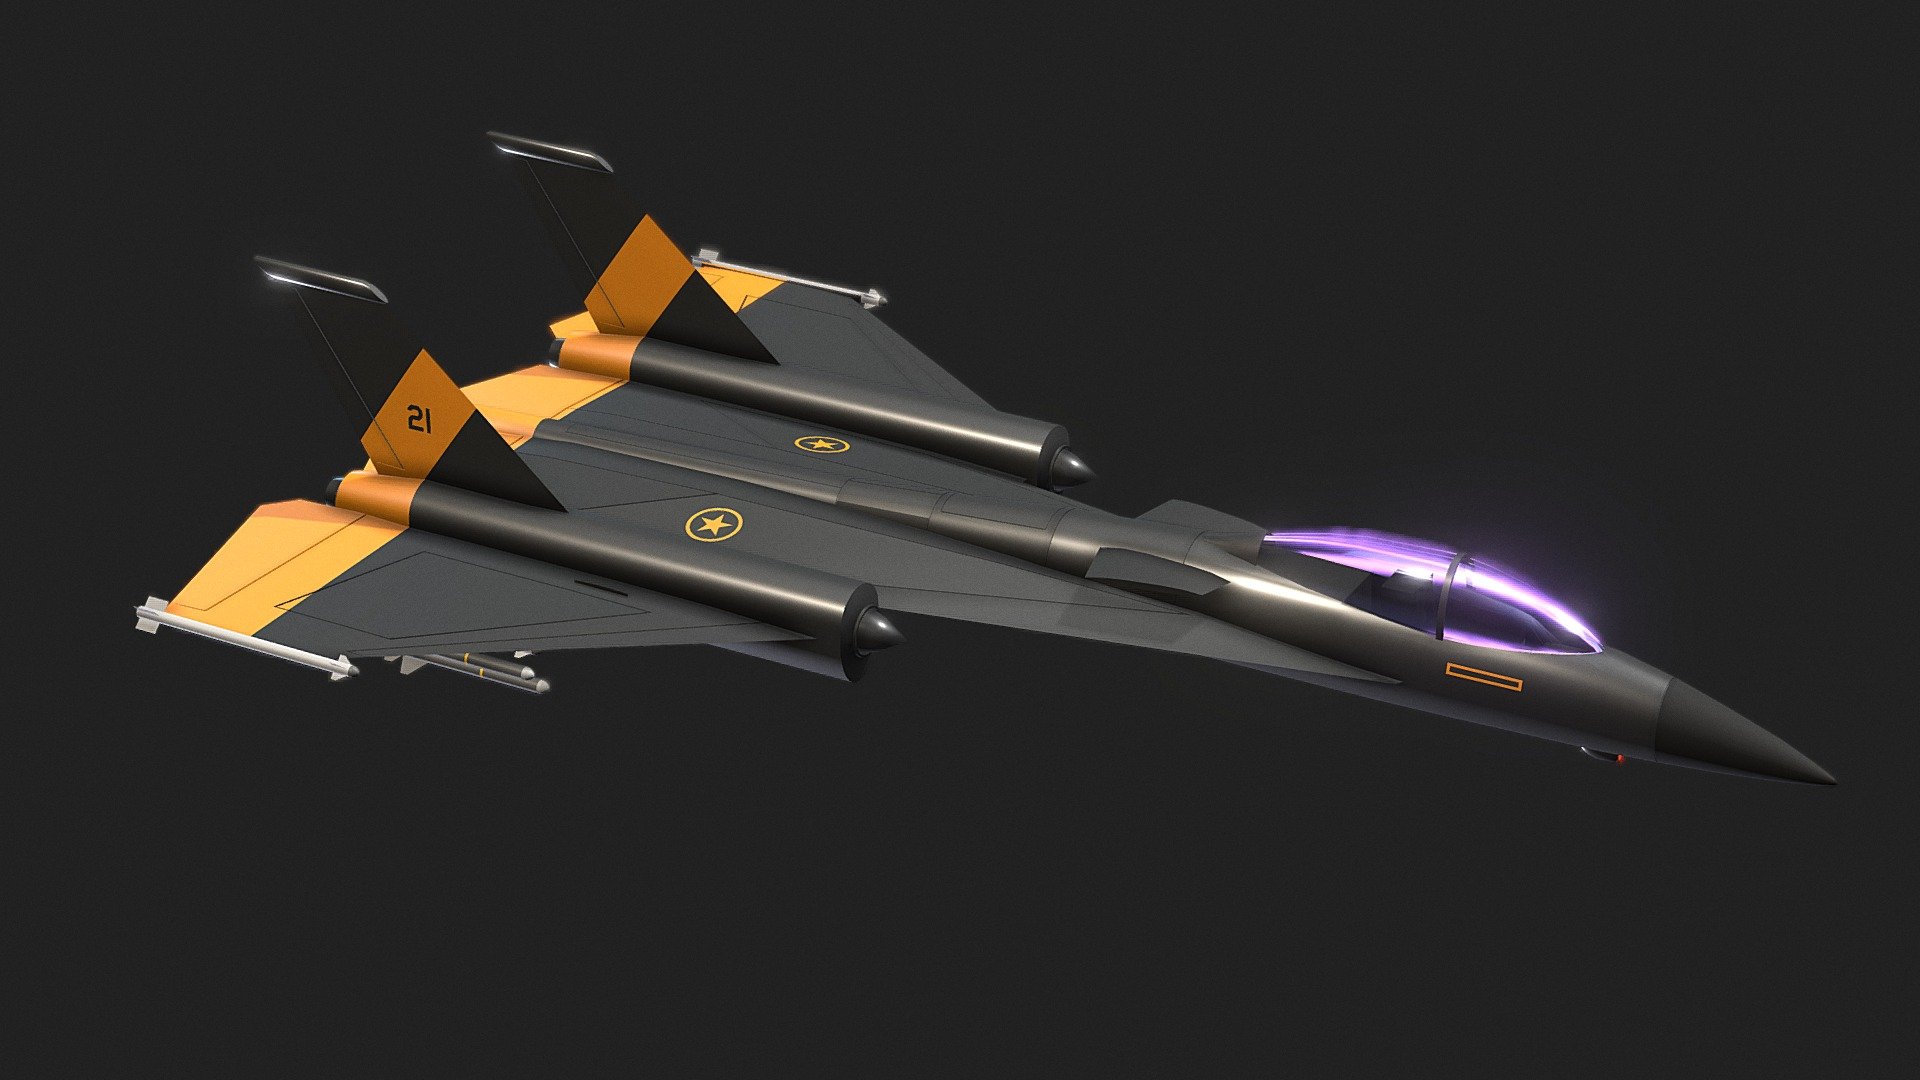 Based on the design from user rundrewrun99 on the Shipbucket forums, mean to be a carrier based fleet defence interceptor operated by the fictional Republic of California.

In-world description from the forum: The Lockheed C.80 &ldquo;Murciélago